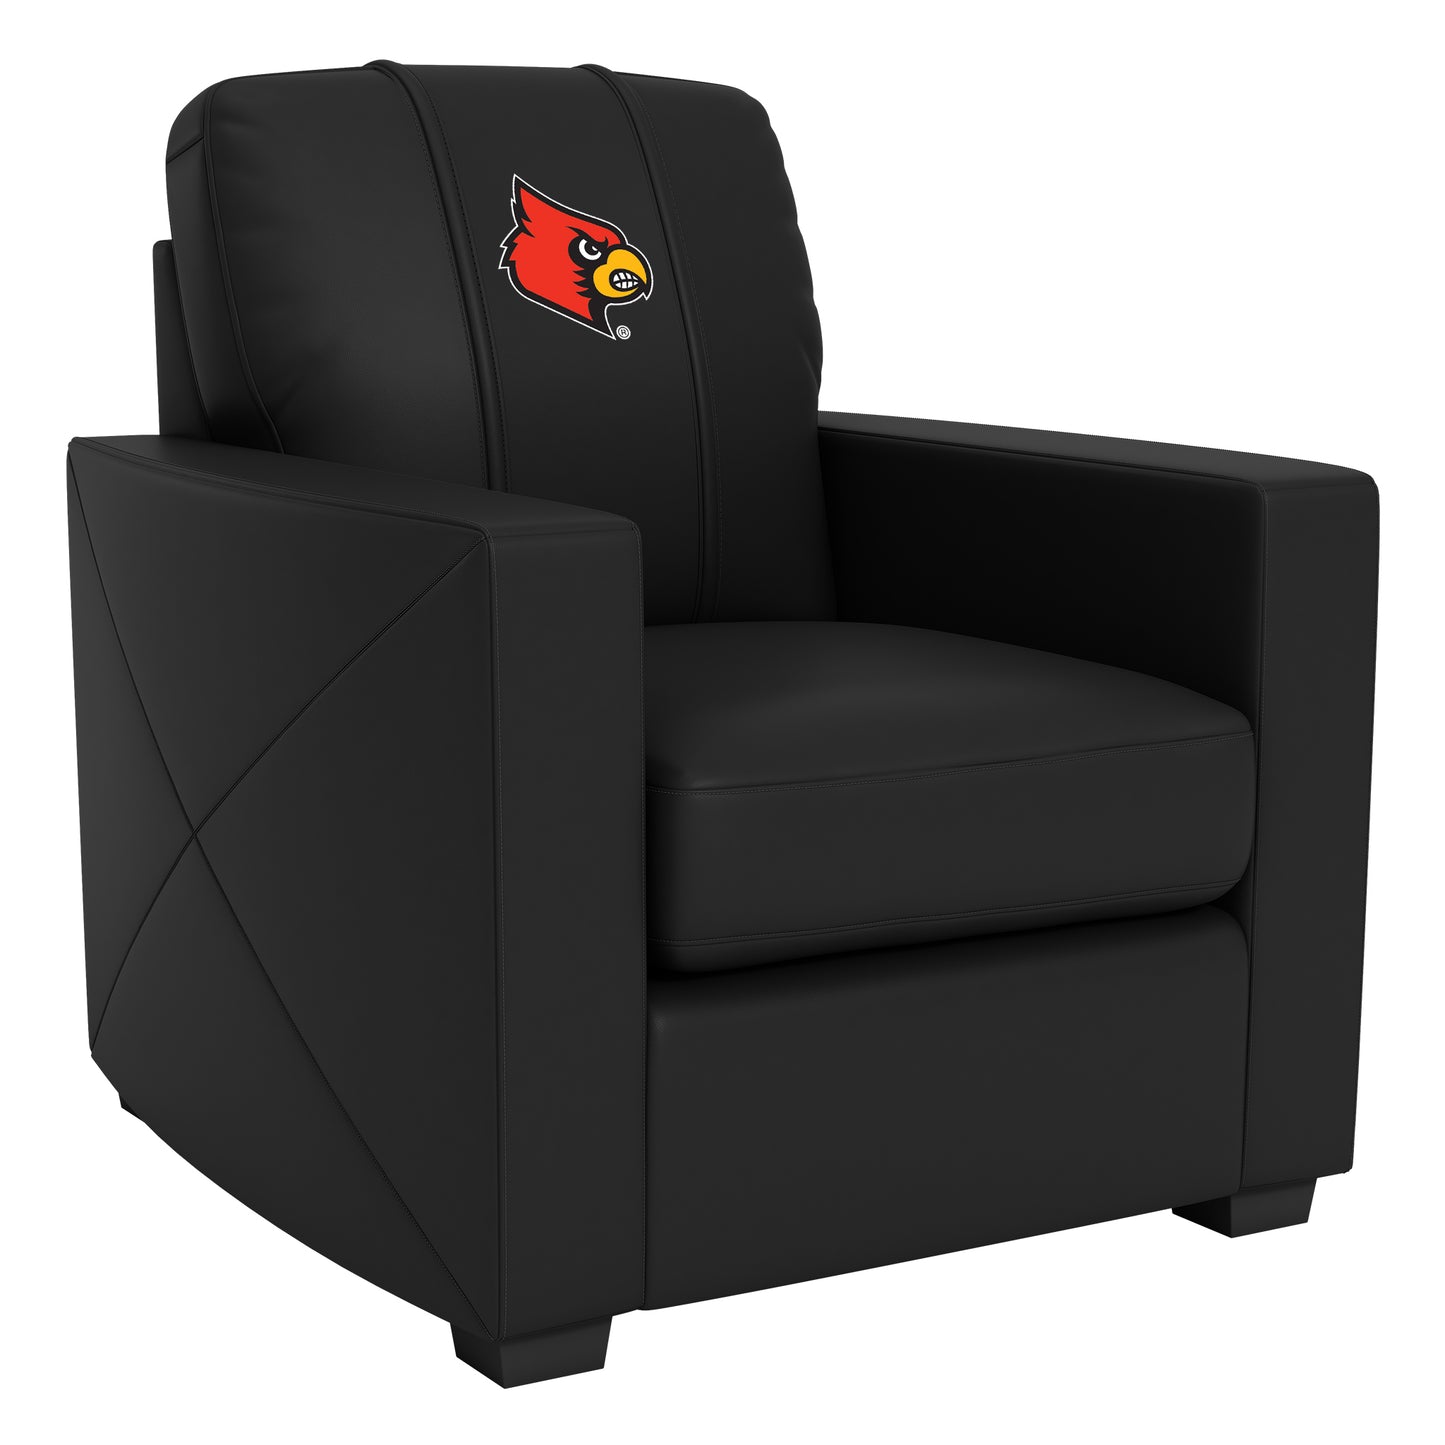 Silver Club Chair with Louisville Cardinals Logo